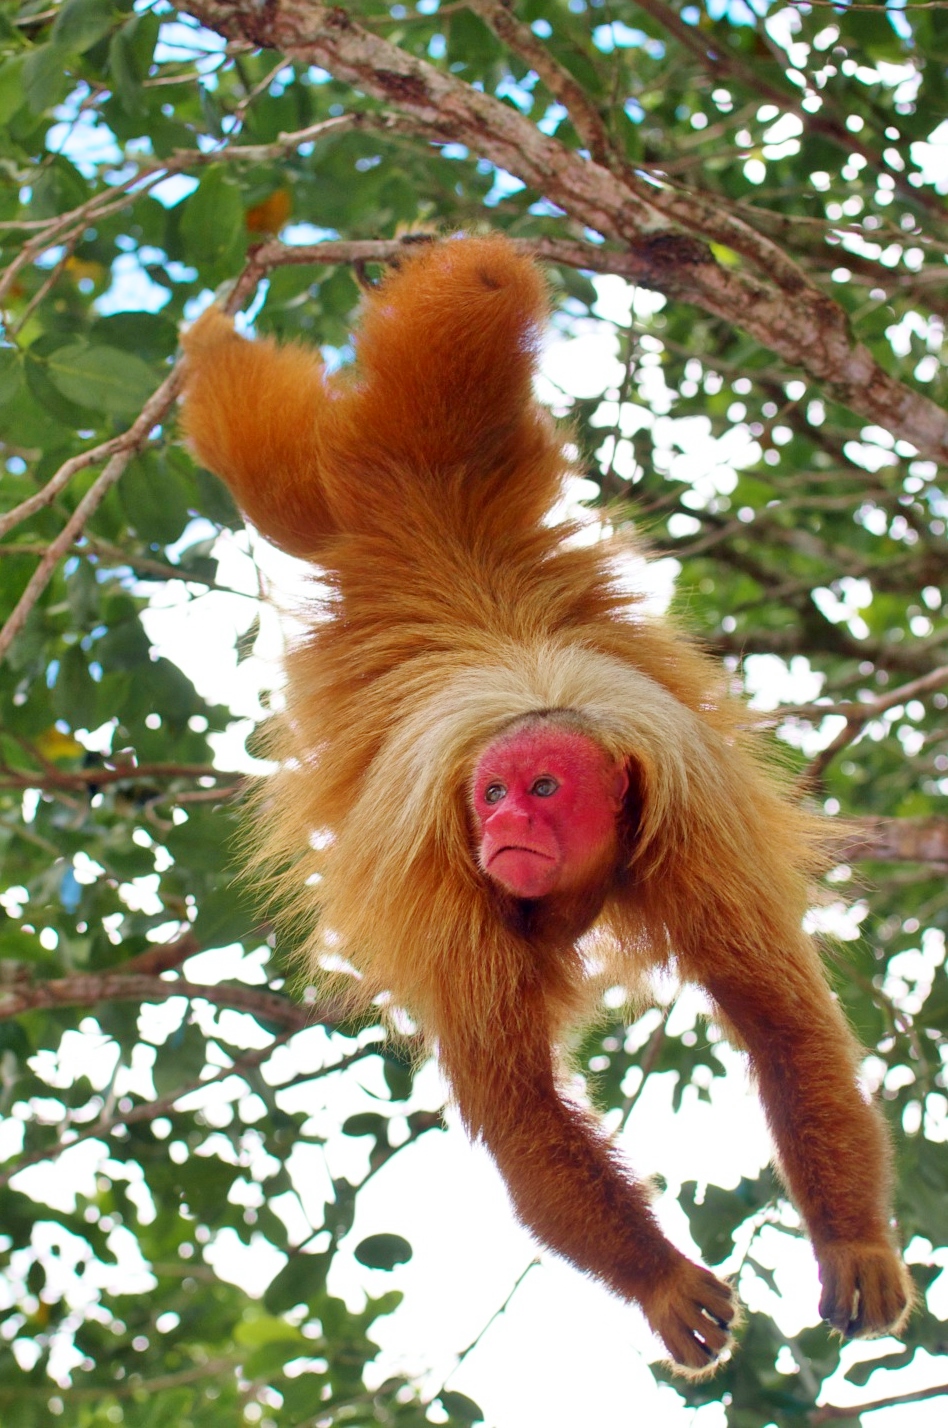 The Red Uakari Monkey, Photo Credit CEDIA, the most amazing monkey I have ever seen!